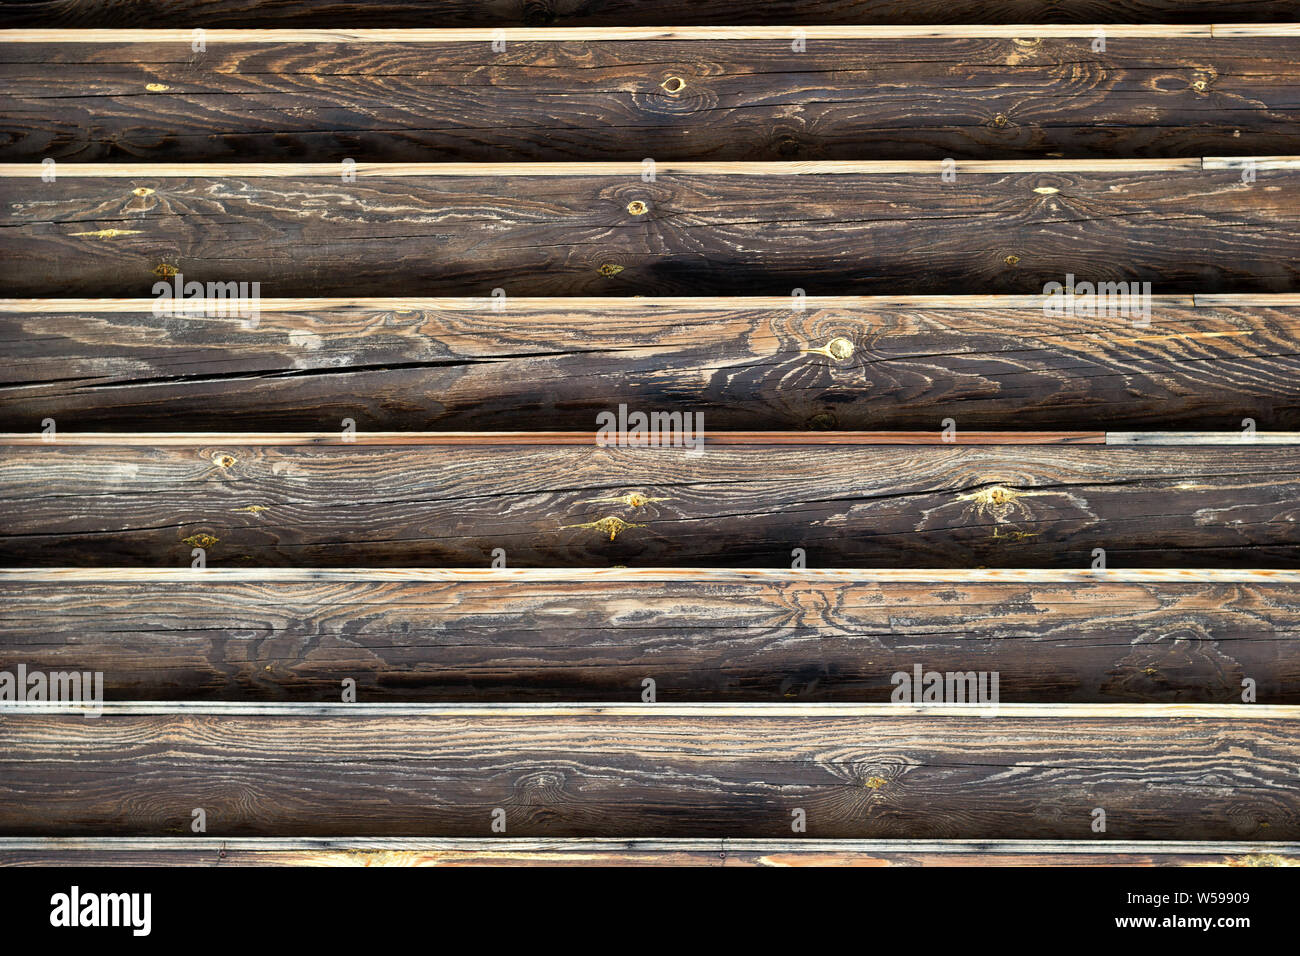 Wall from wooden logs. Background with copy space. Horizontal lines of dark brown weathered wood material. Place for custom text. Log house exterior. Stock Photo